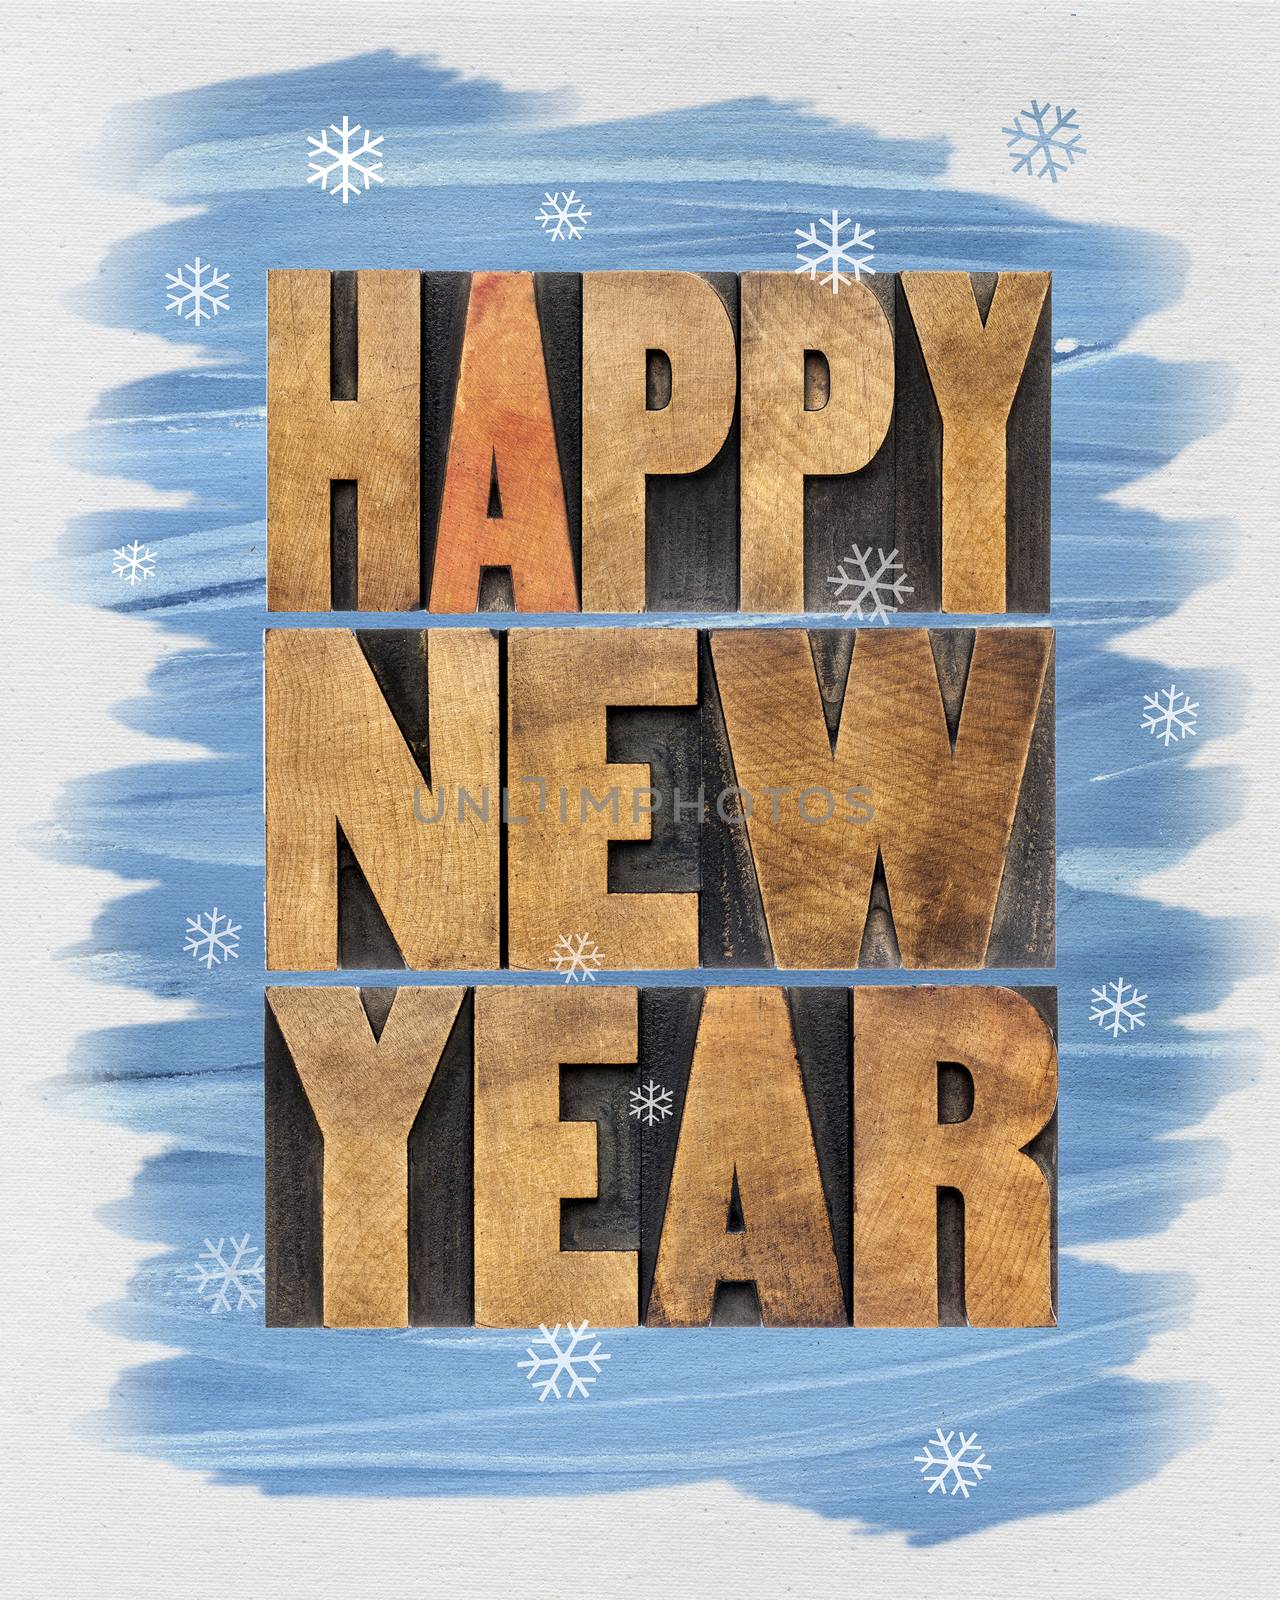 Happy New Year greetings or wishes - a collage of  text in vintage letterpress wood type blocks and watercolor painting on canvas